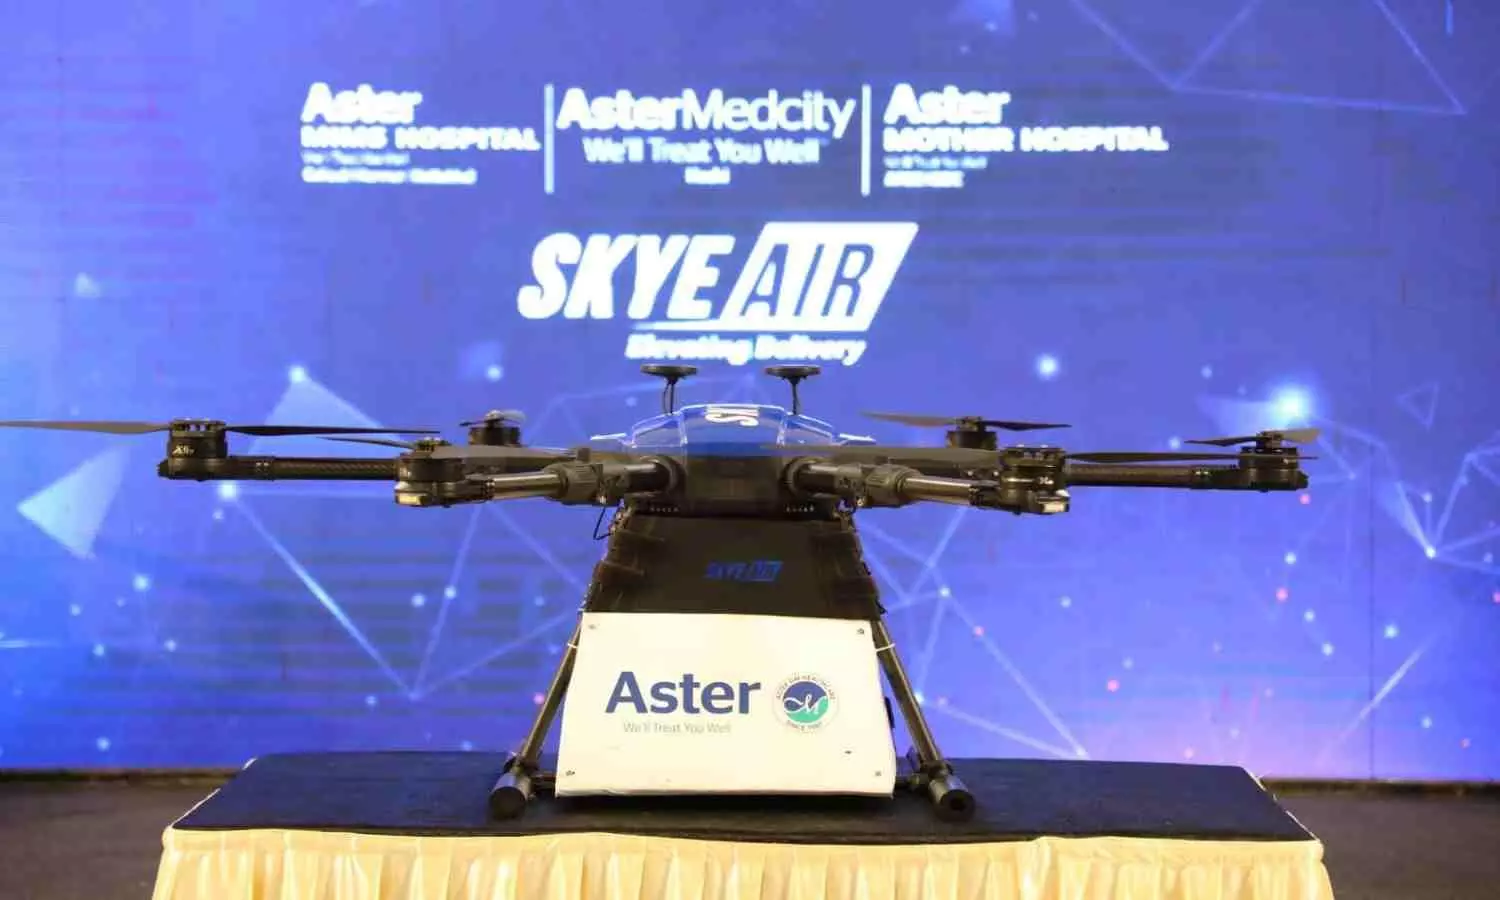 Skye Air will demonstrate how drone technology can speed up the delivery of medical and diagnostic samples